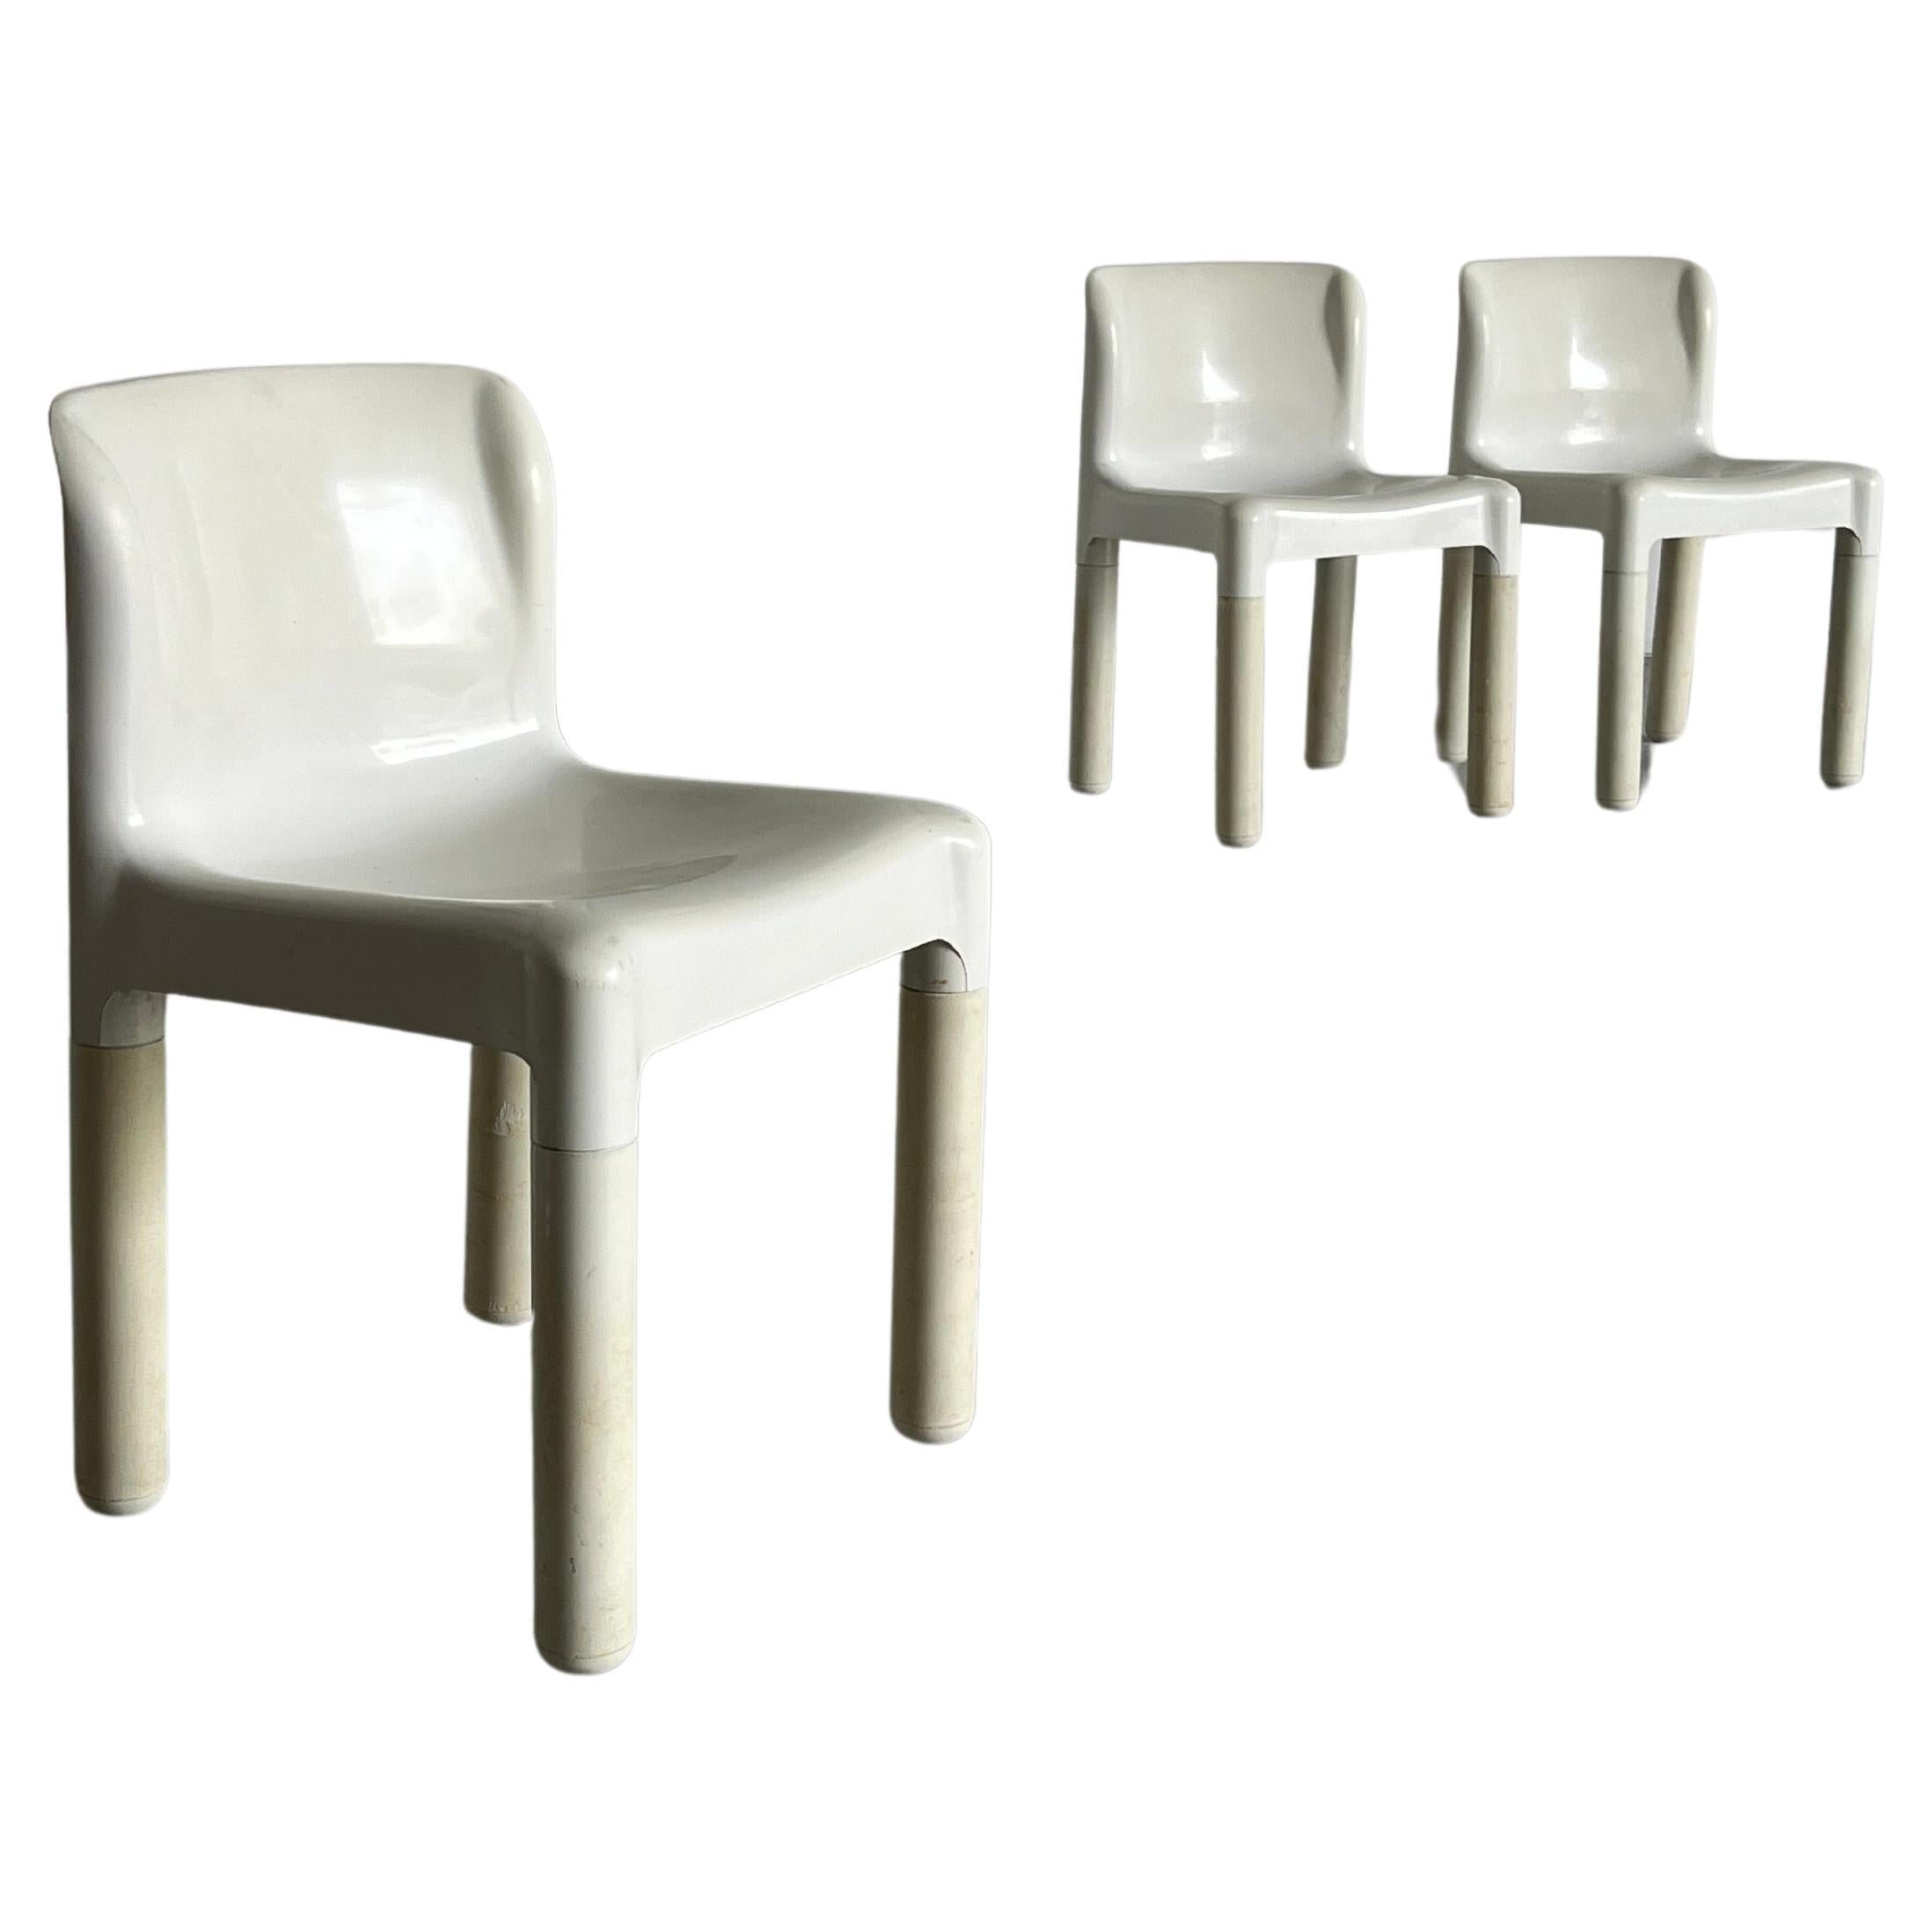 1 of 3 Vintage Carlo Bartoli 4875 Chairs for Kartell, White Edition, 1972 Italy For Sale